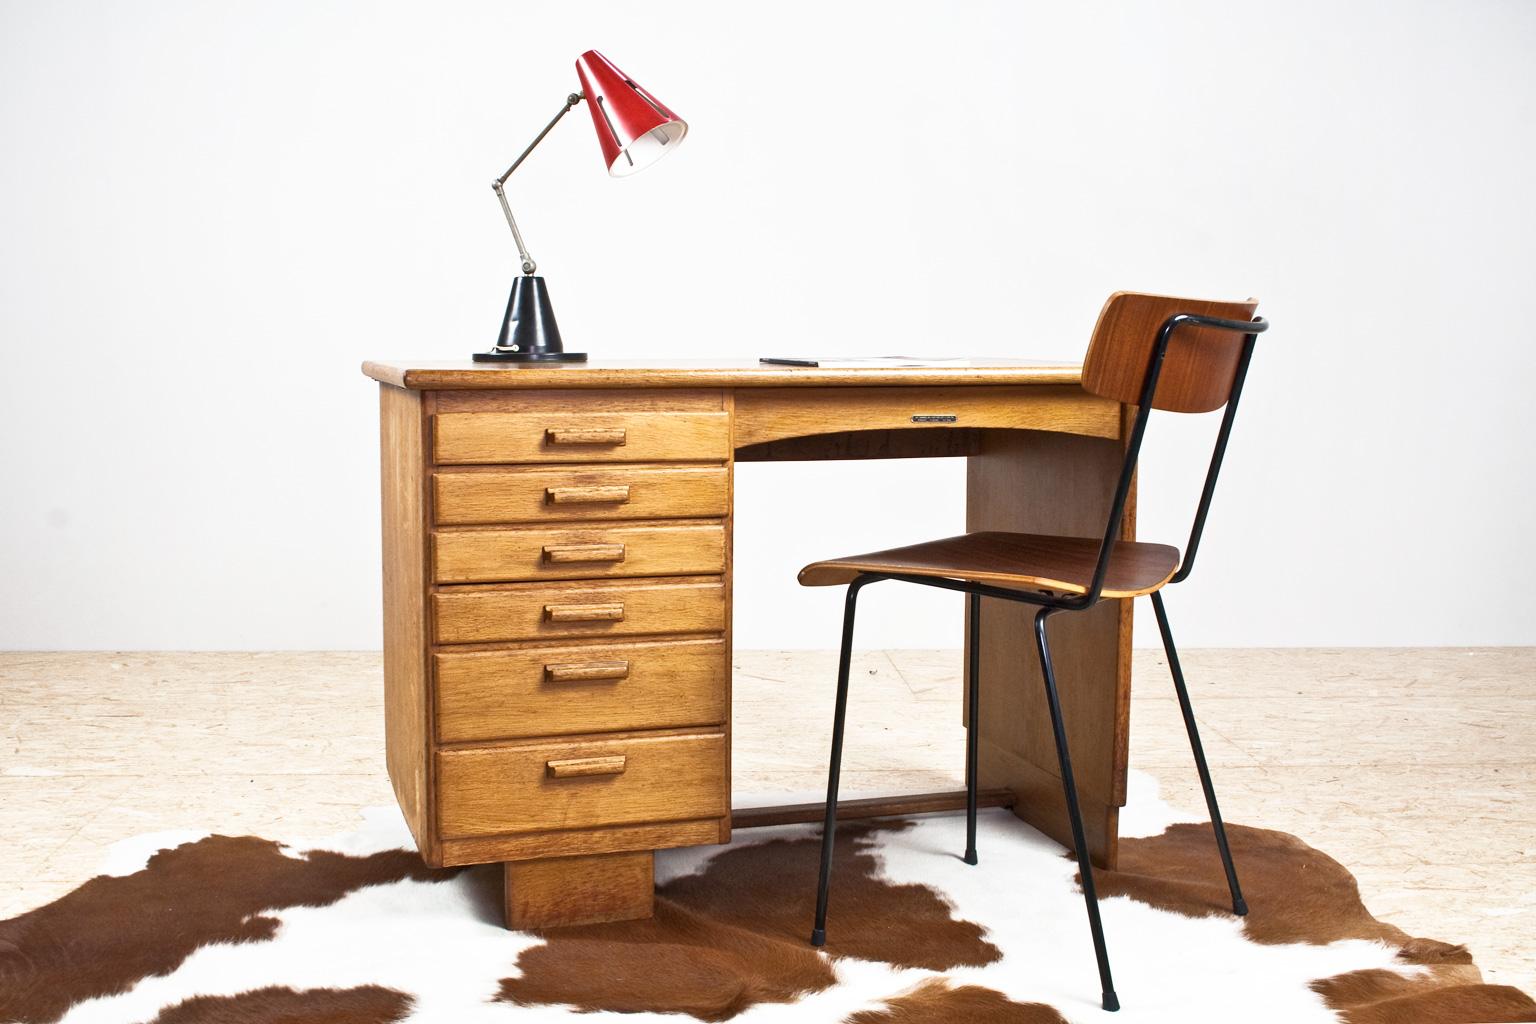 Stained Art Deco Writing Table and Petit Desk in Solid Oak, Dutch Modernist, 1930s